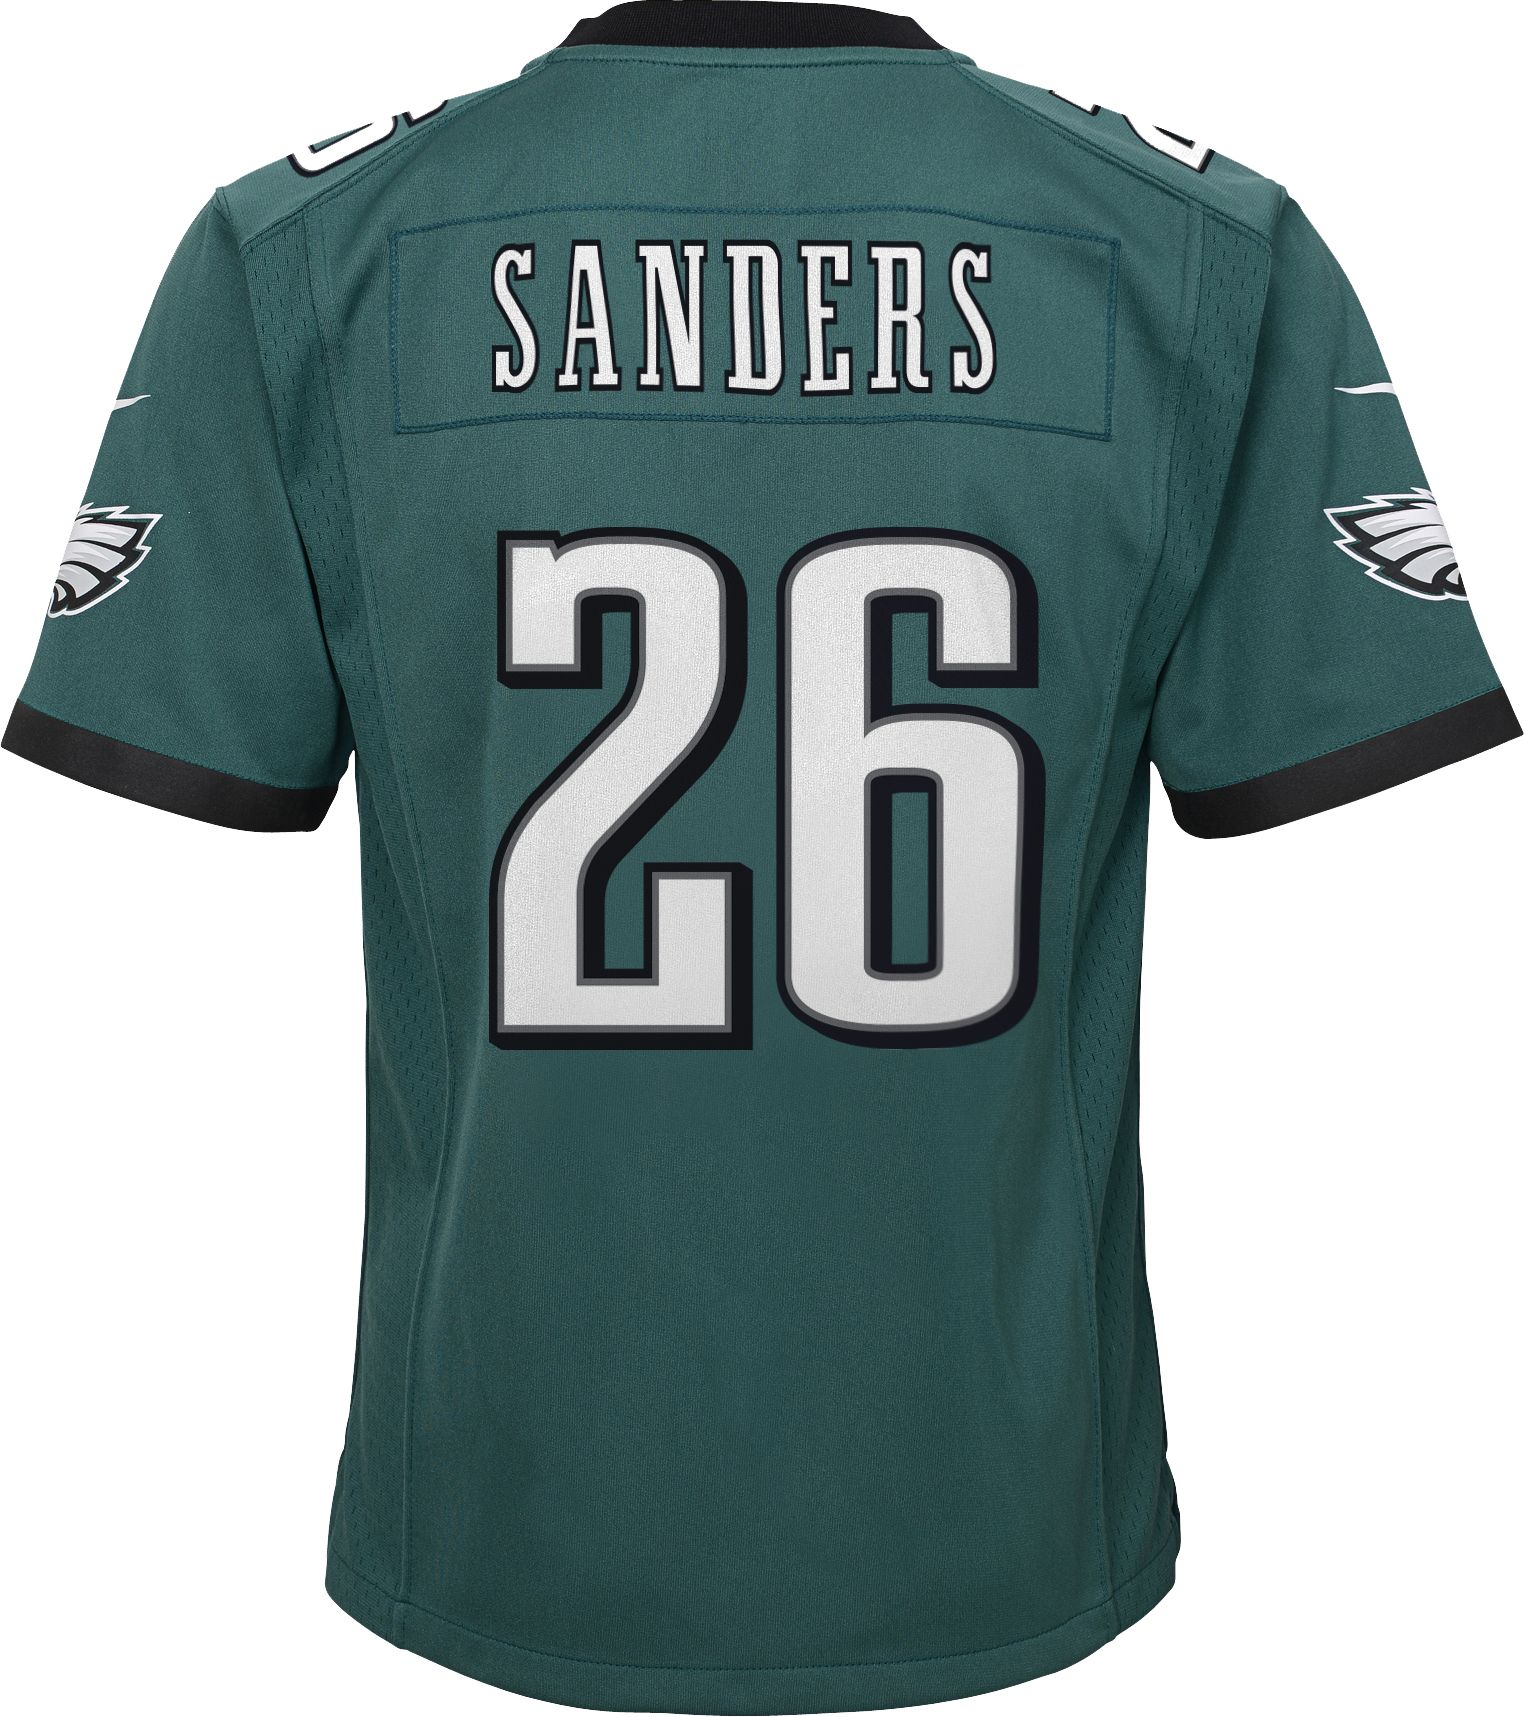 miles sanders youth jersey